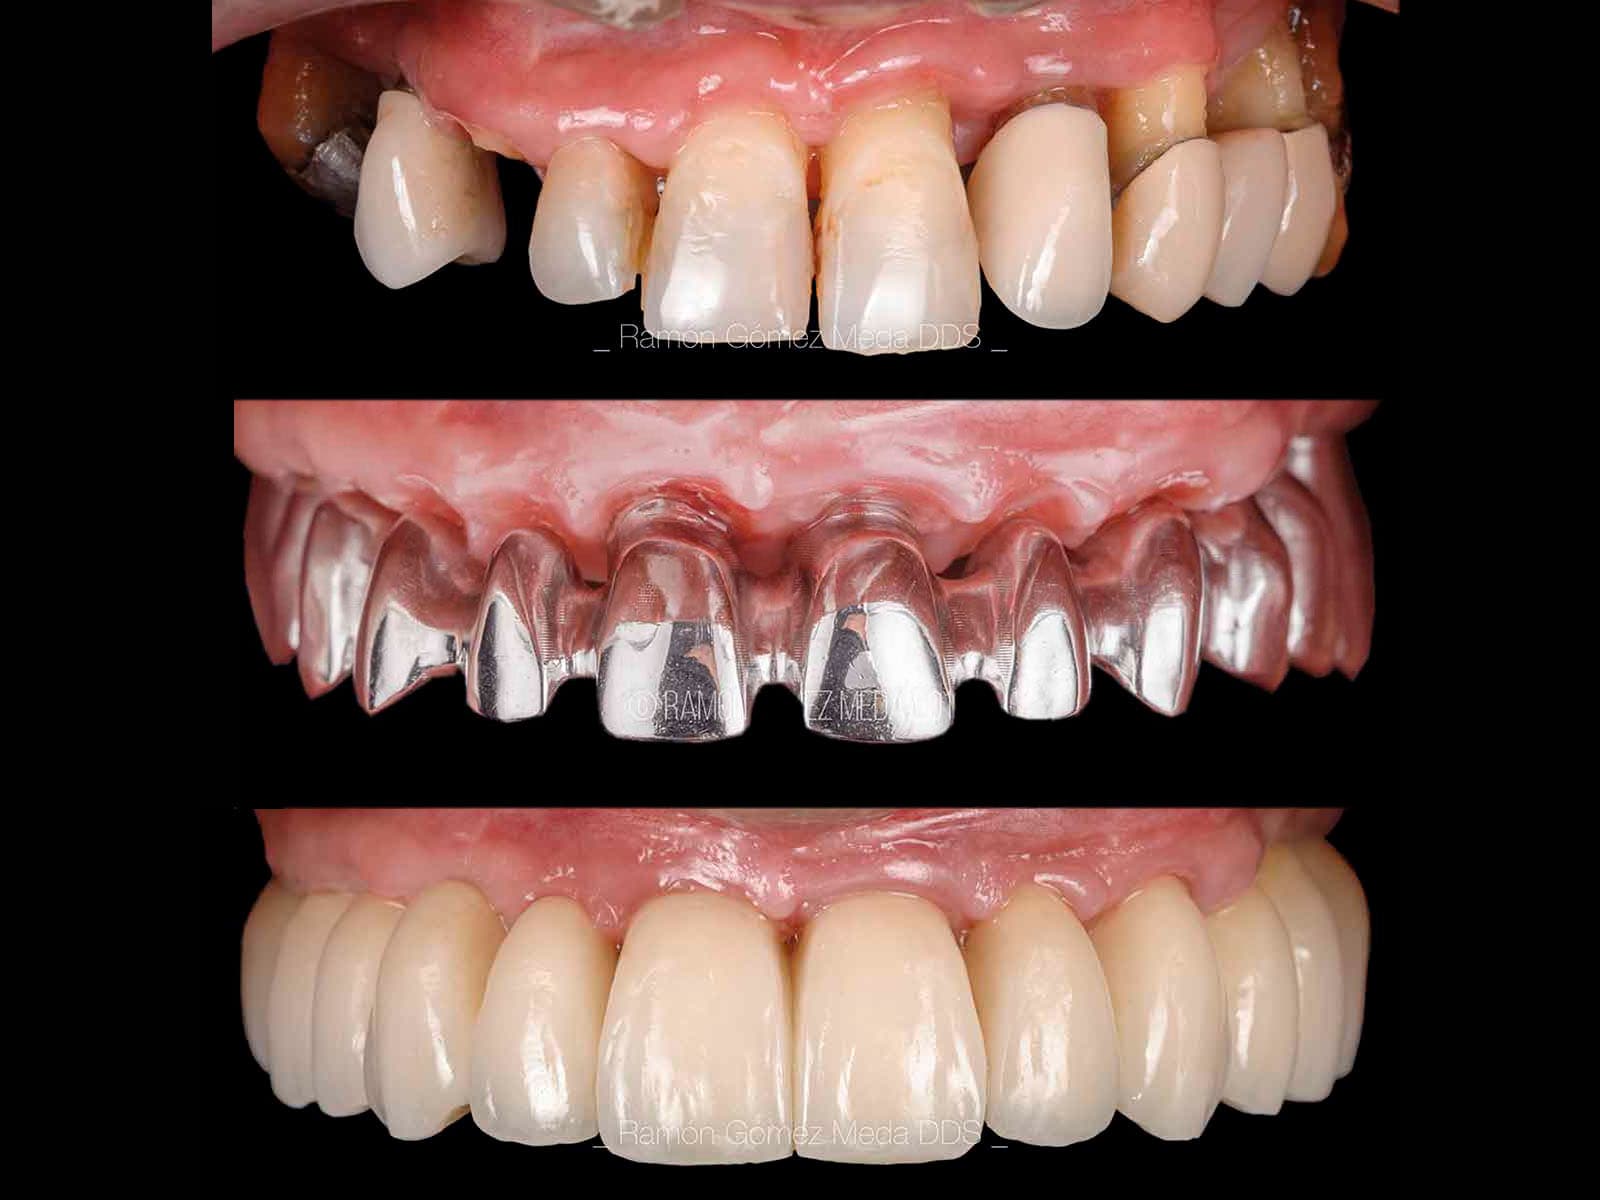 Rehabilitation of an advanced periodontal disease with a scalloped denture